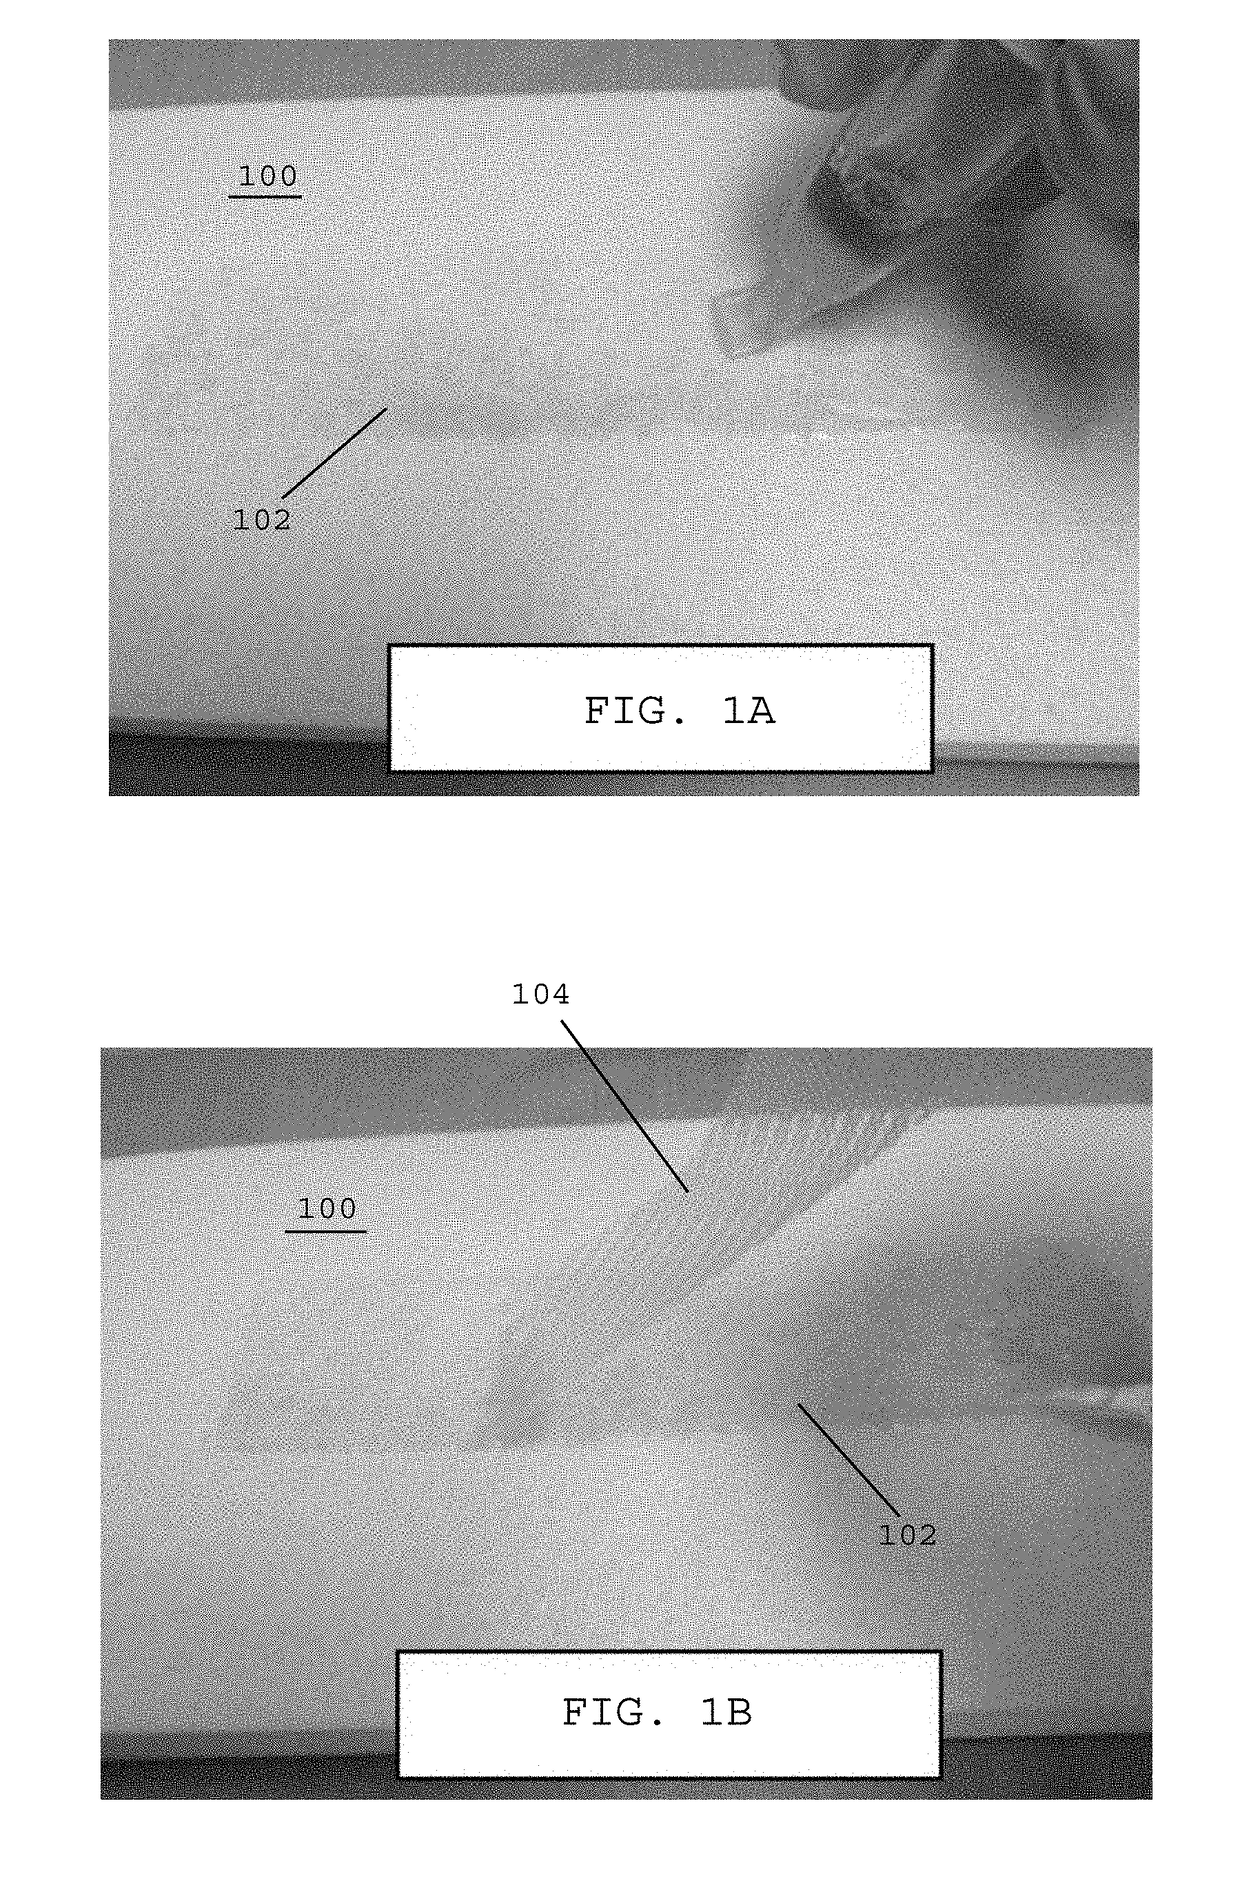 Systems and methods for closing incisions formed in fragile tissue